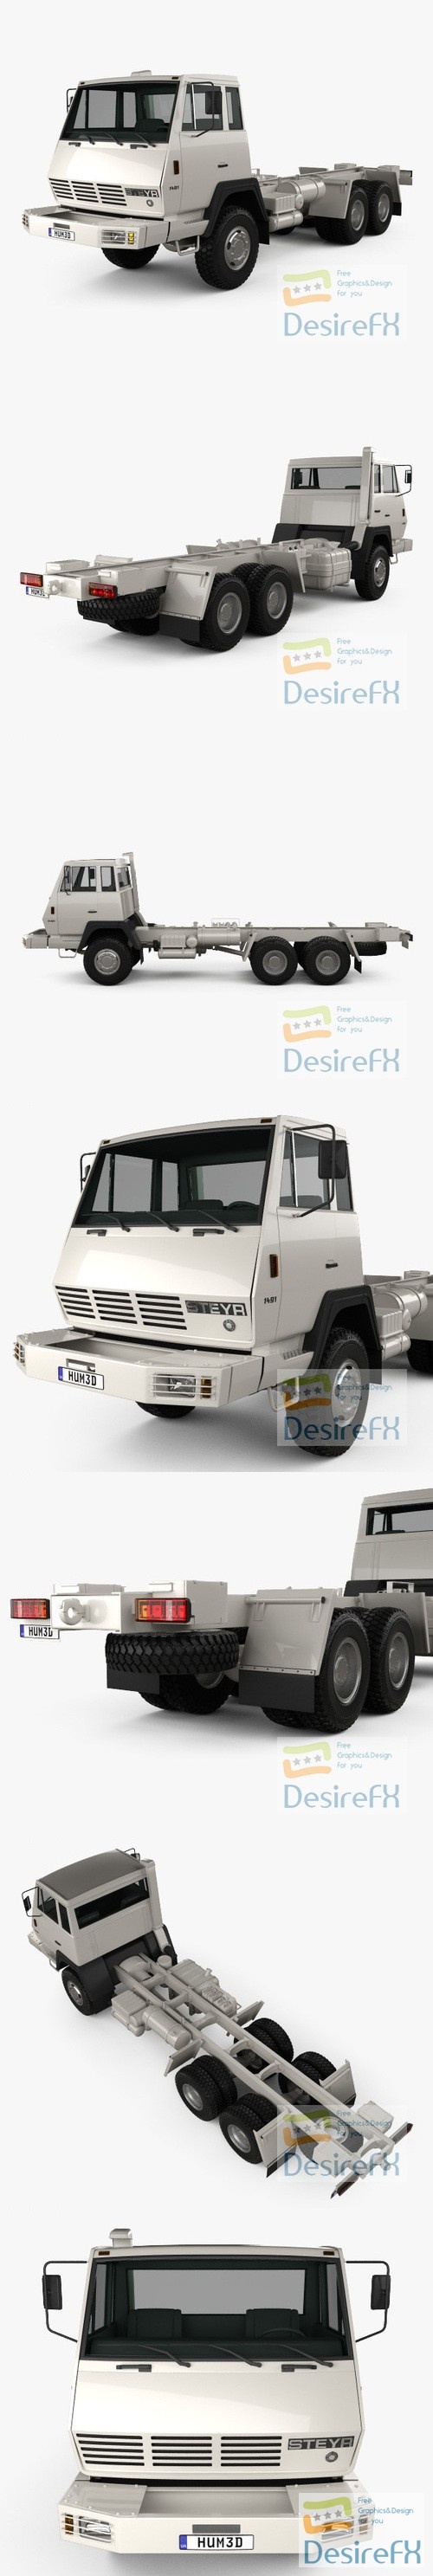 Steyr Plus 91 1491 Chassis Army Truck 1978 3D Model